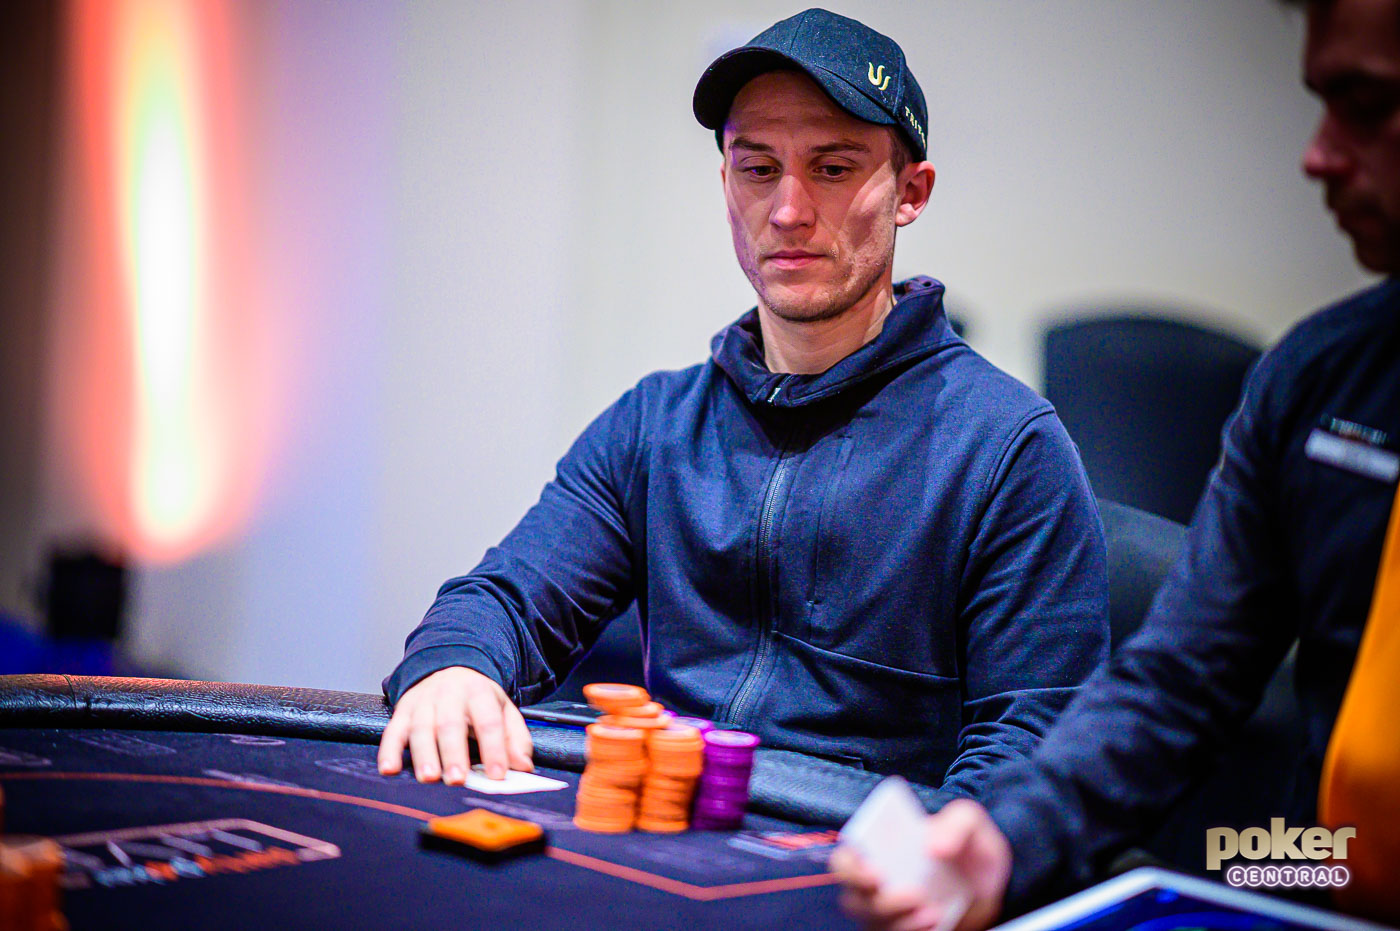 Crushing Poker Tournaments: Who is Hot So Far in 2021?